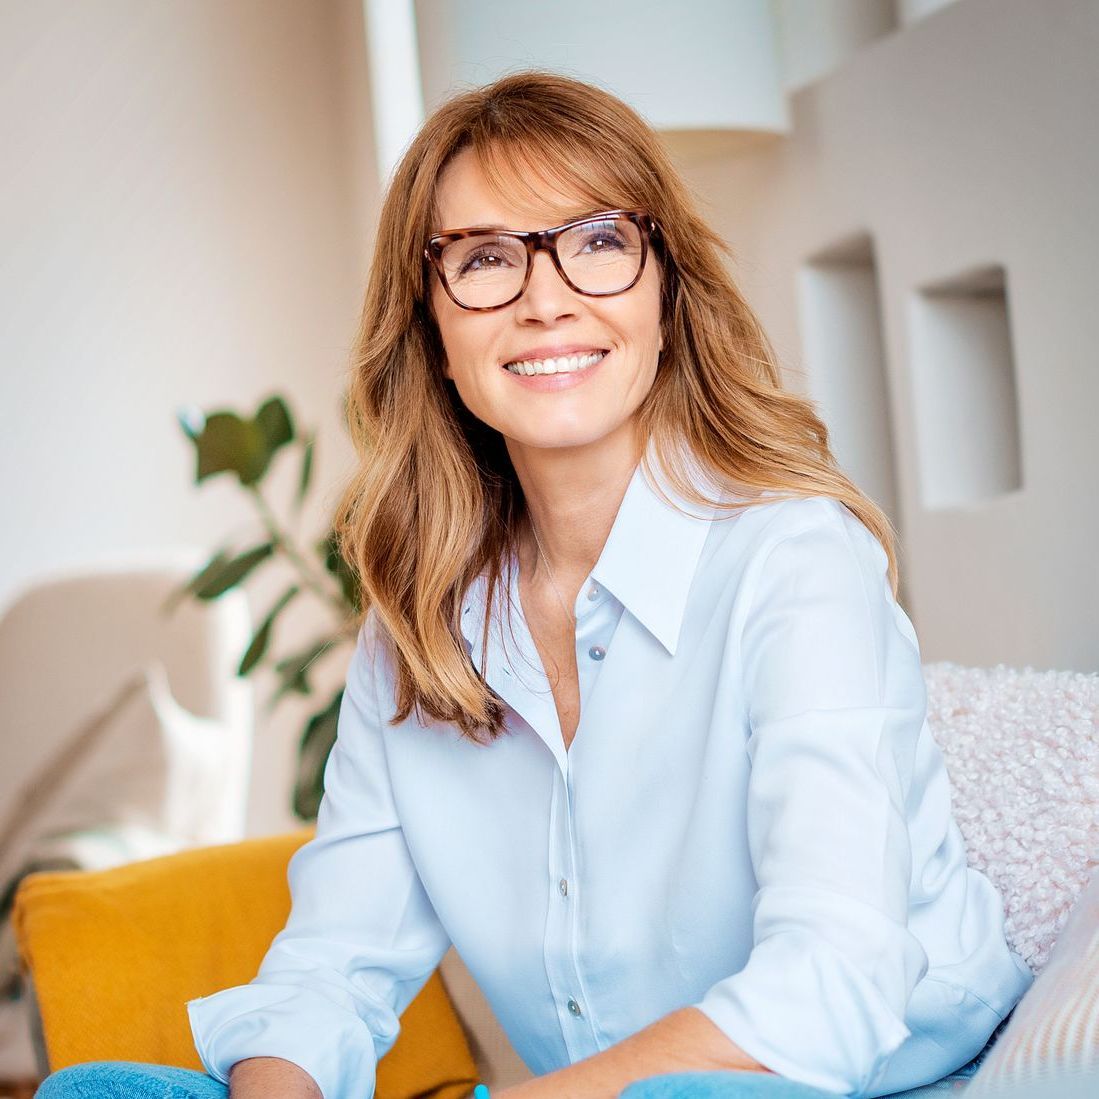 A woman wearing glasses is sitting on a couch and smiling.